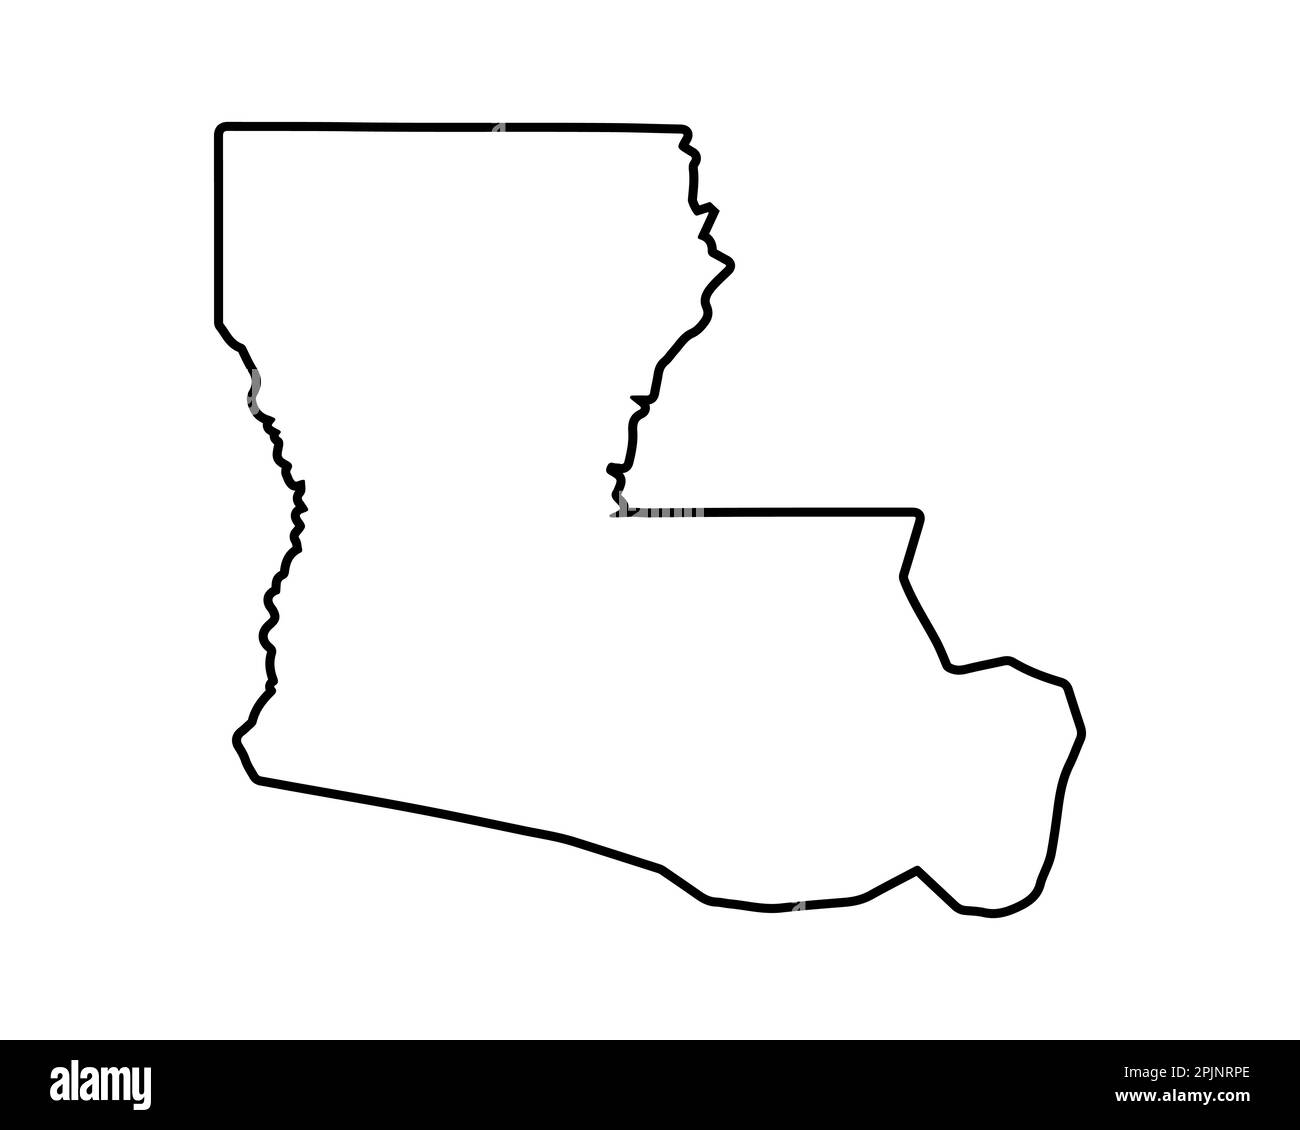 Louisiana state map. US state map. Louisiana outline symbol. Vector illustration Stock Vector